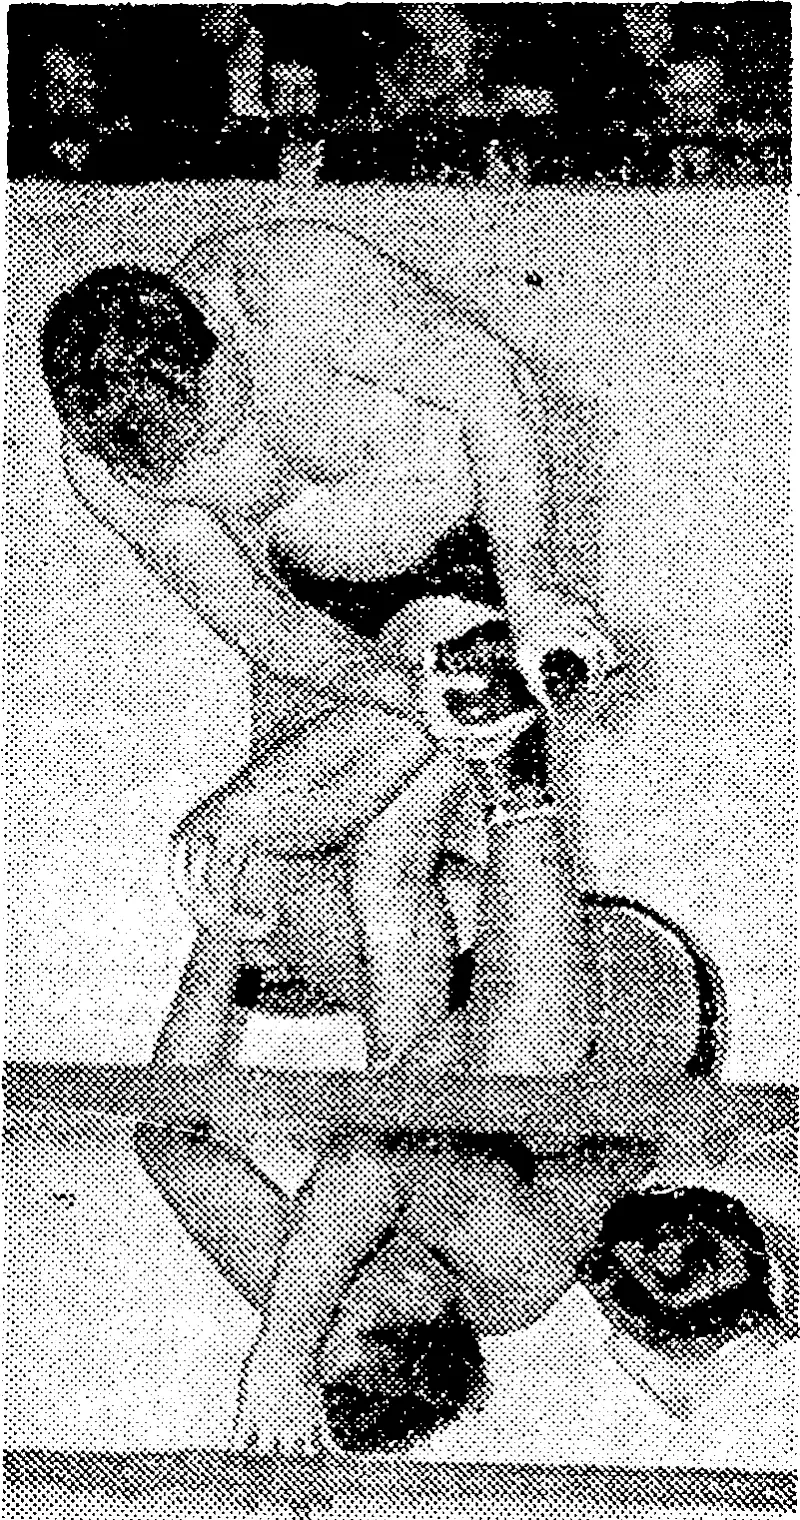 Jack Dmtovan applies a barred toehold to "Lofty" Blomfield at this week's wrestling bout at the Town Hall. (Evening Post, 13 May 1939)